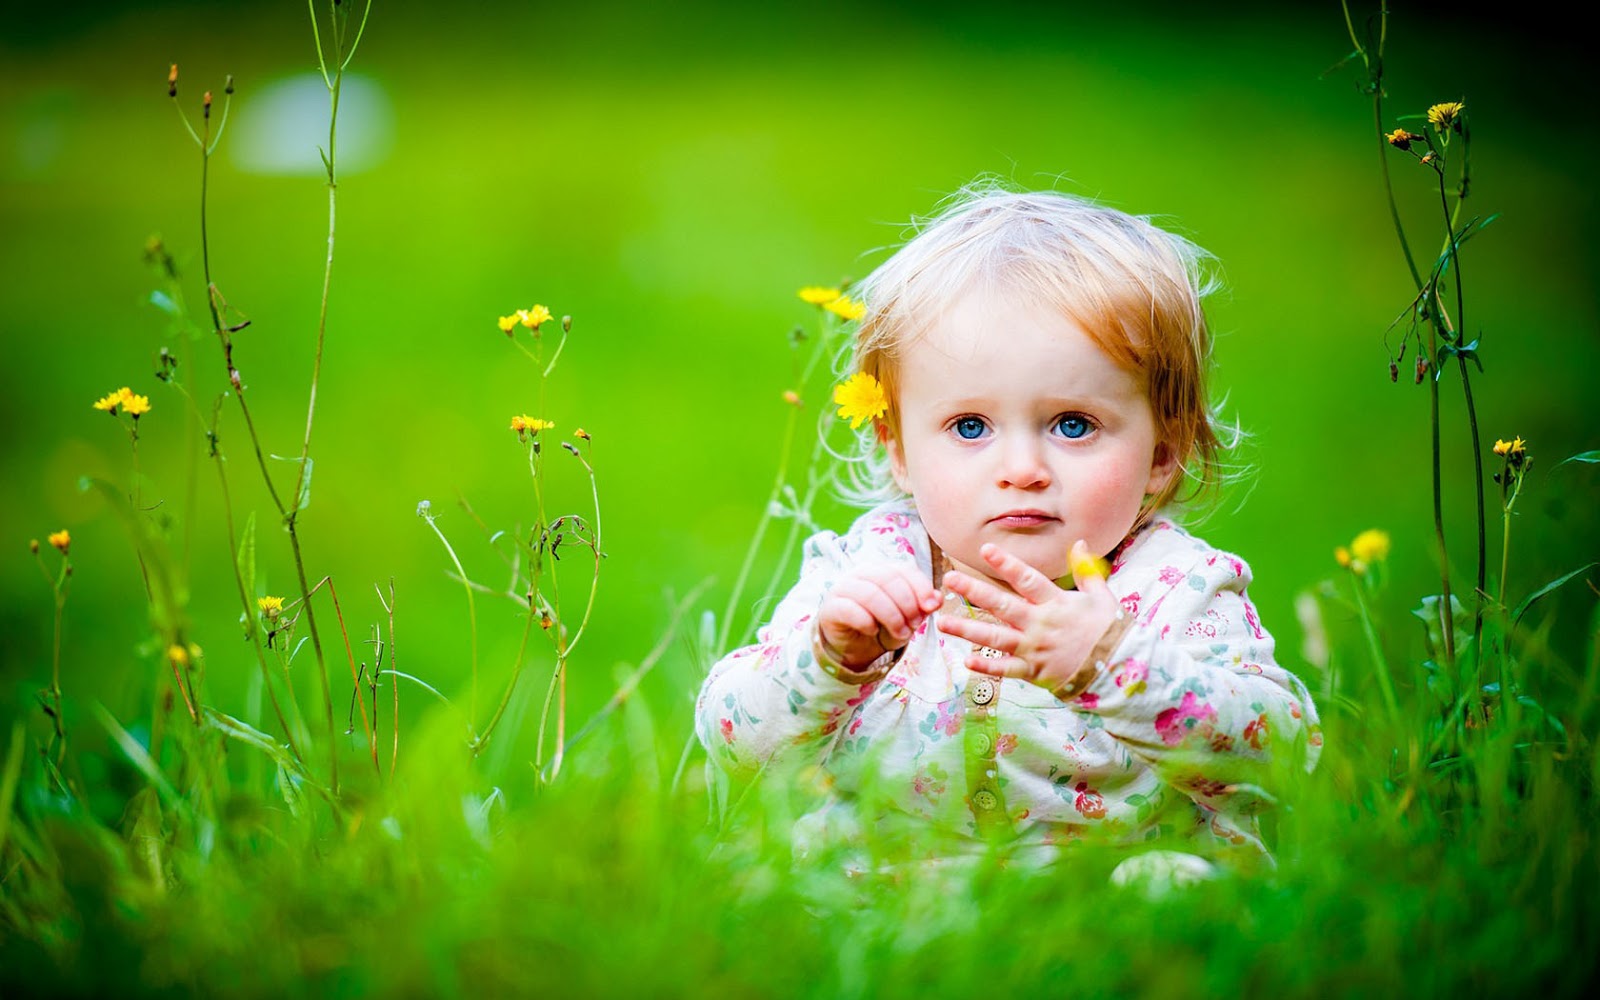 45 Small and Cute Baby Wallpaper download for free